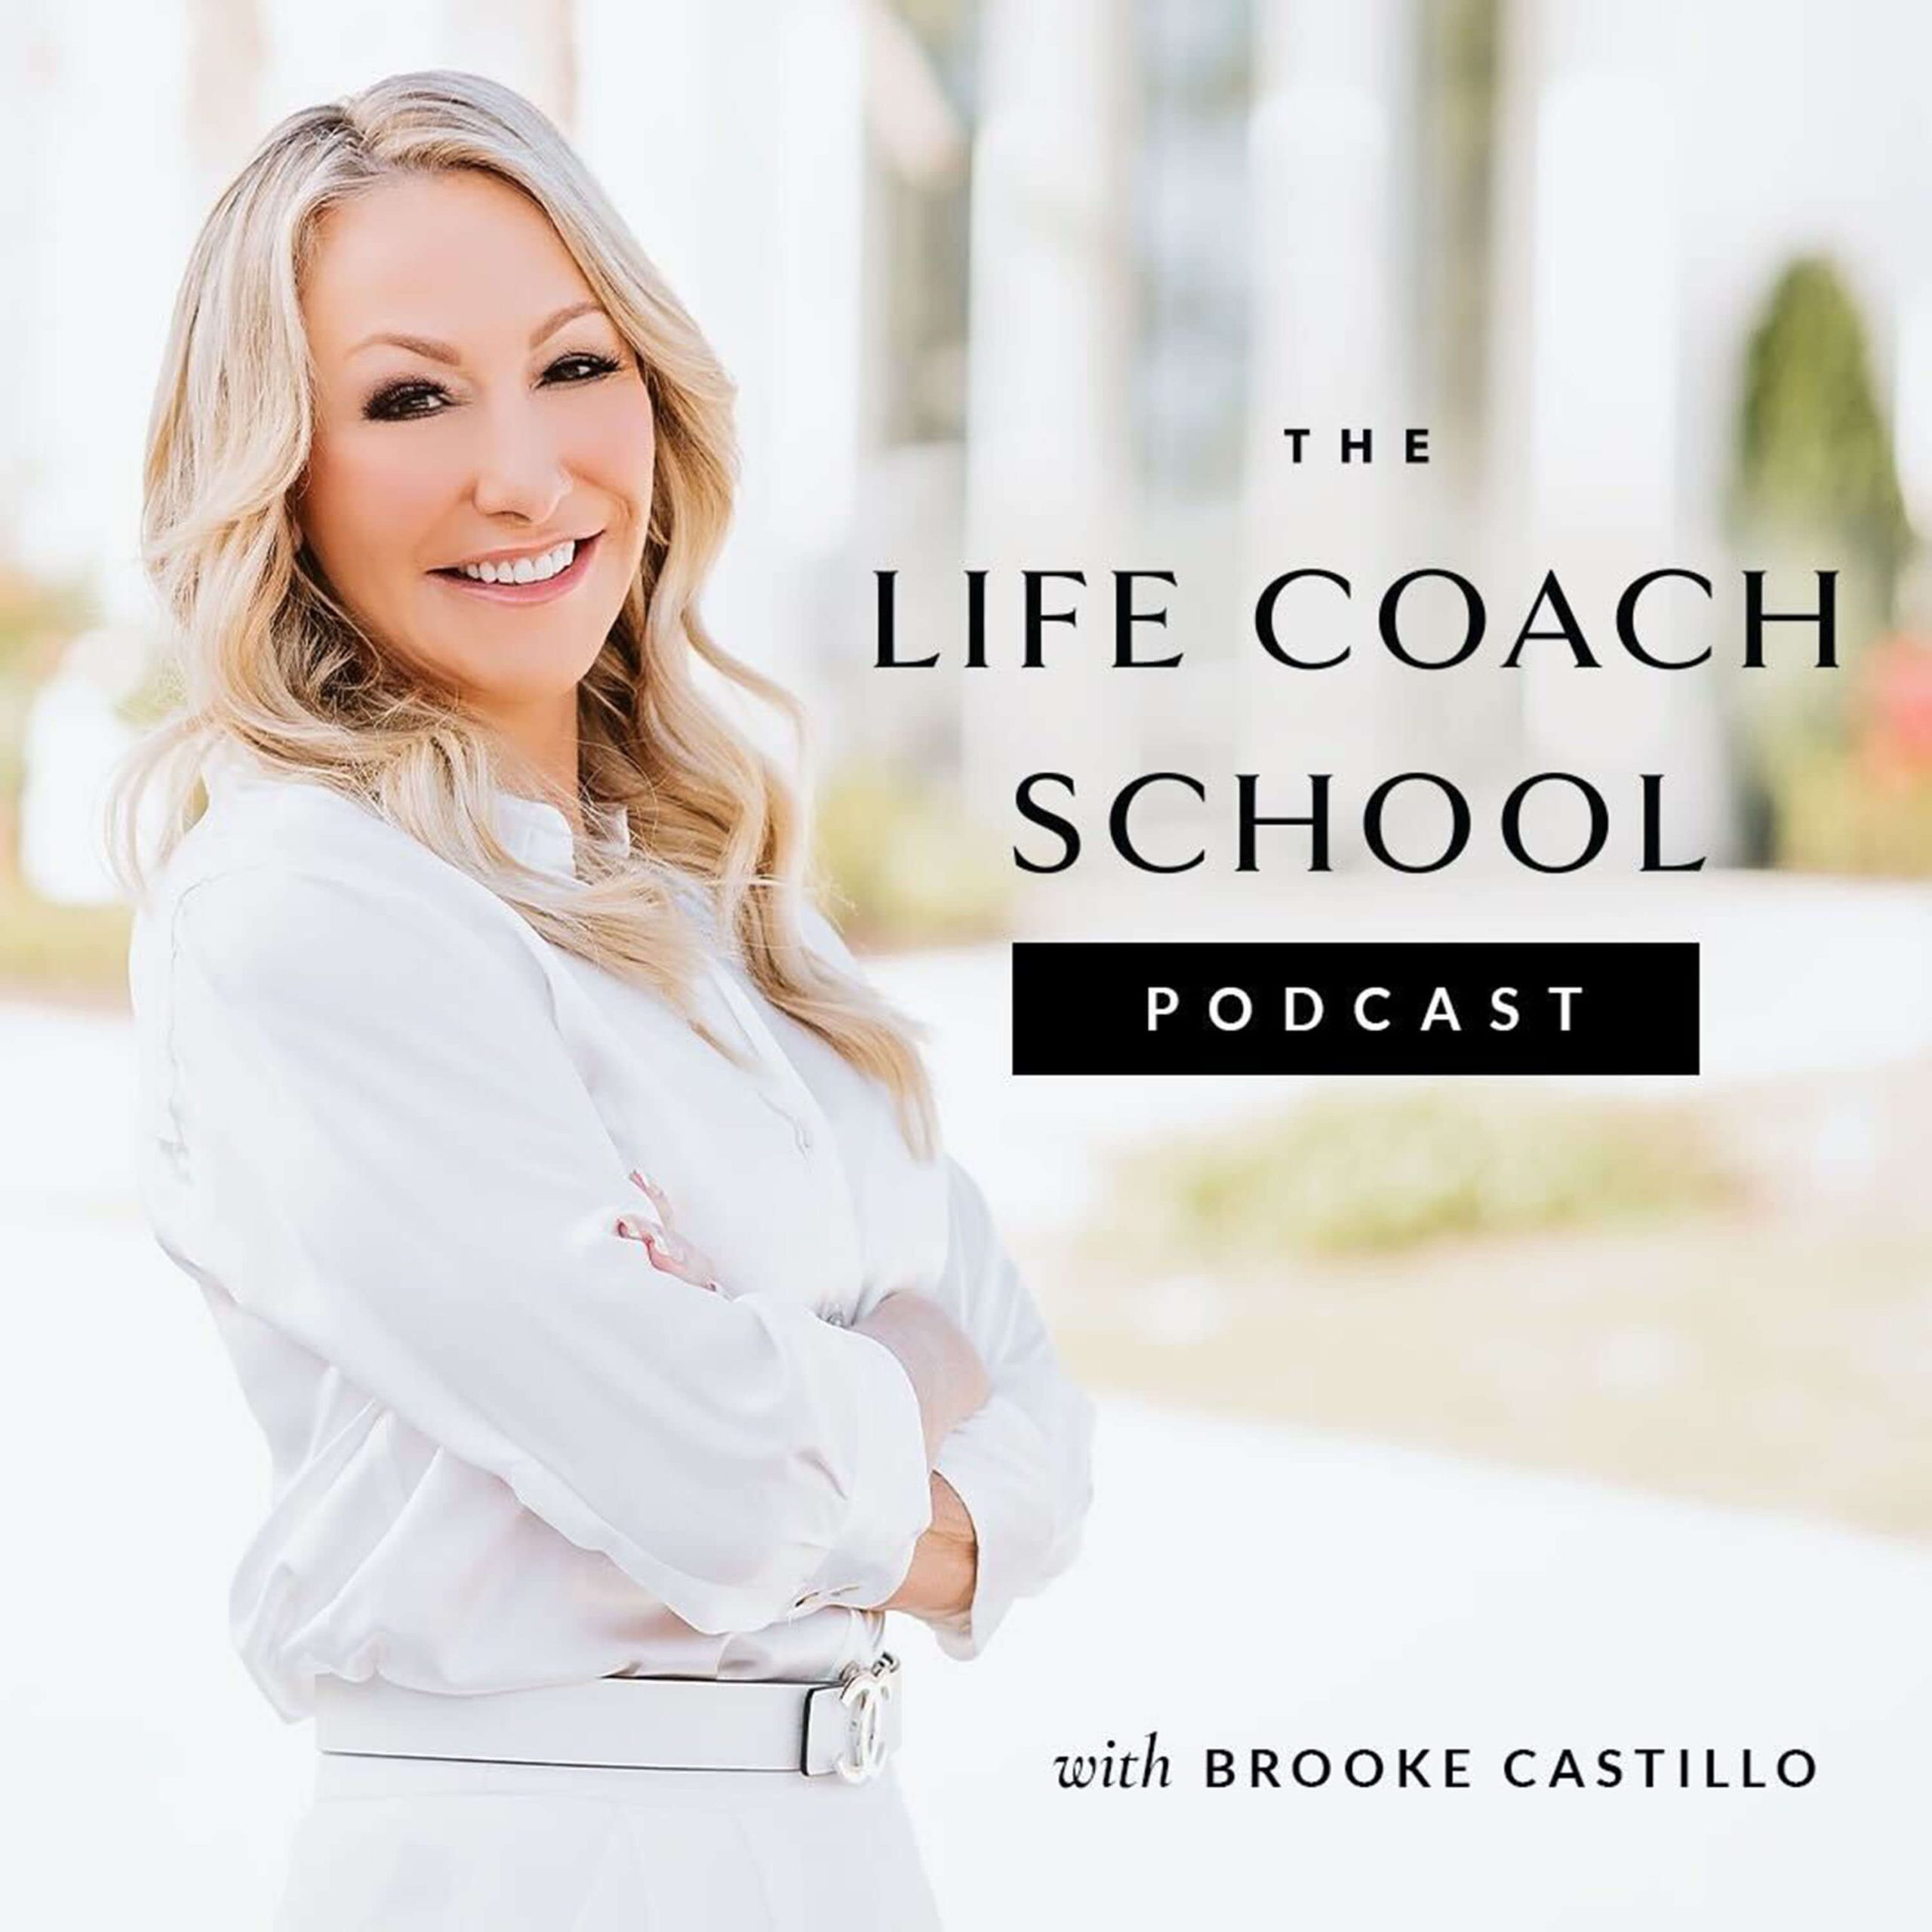 The life coach school podcast with brooke castello.